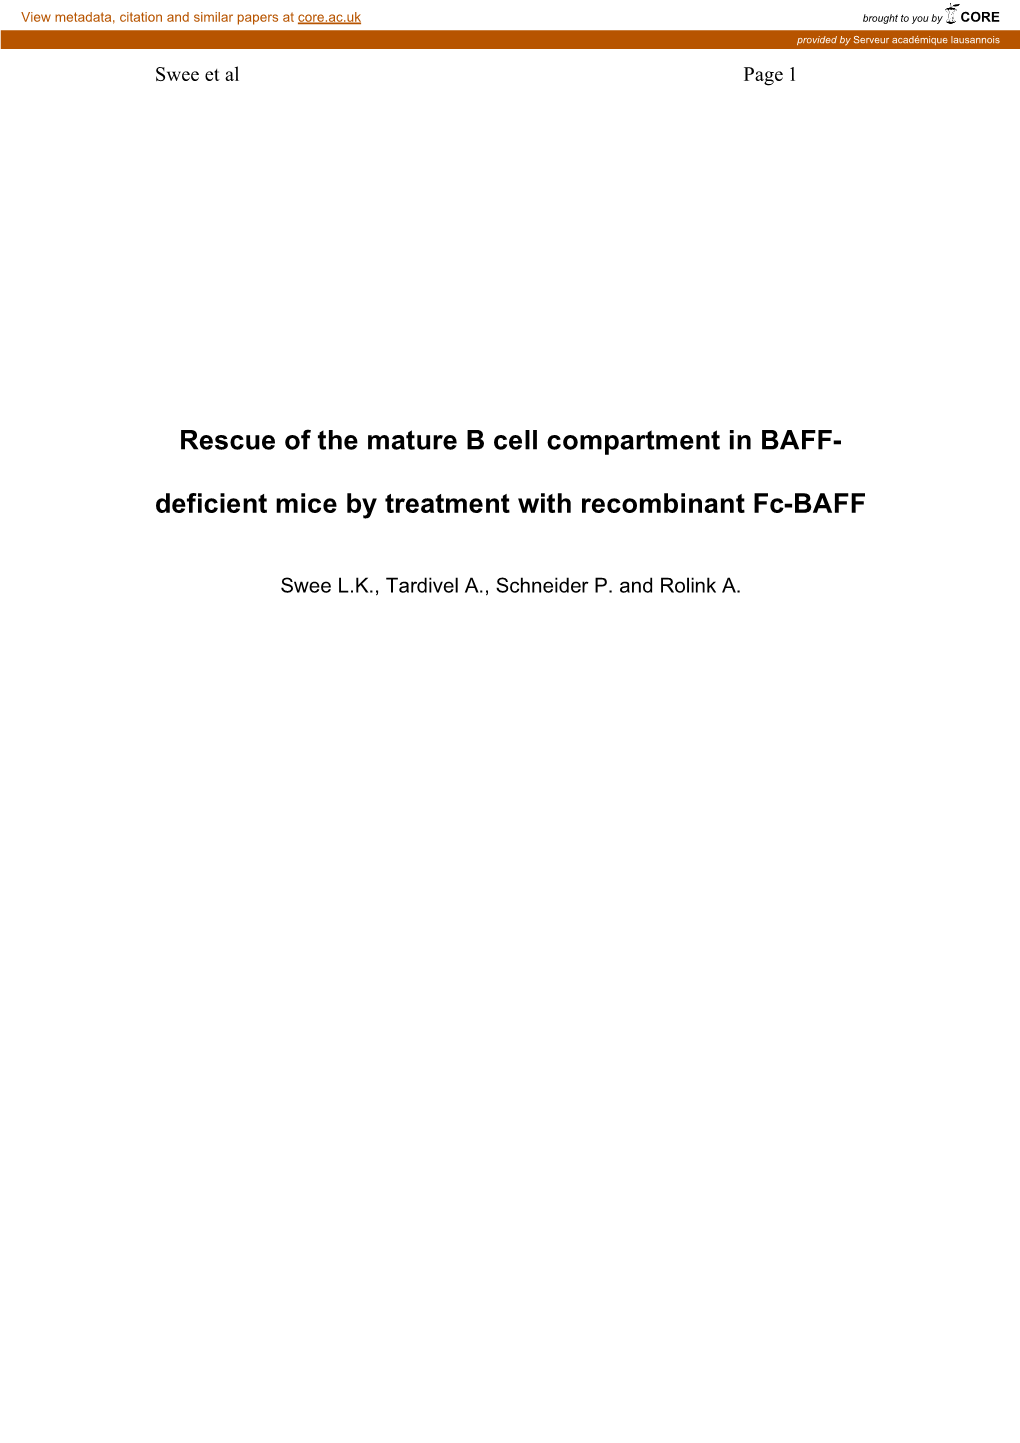 Deficient Mice by Treatment with Recombinant Fc-BAFF